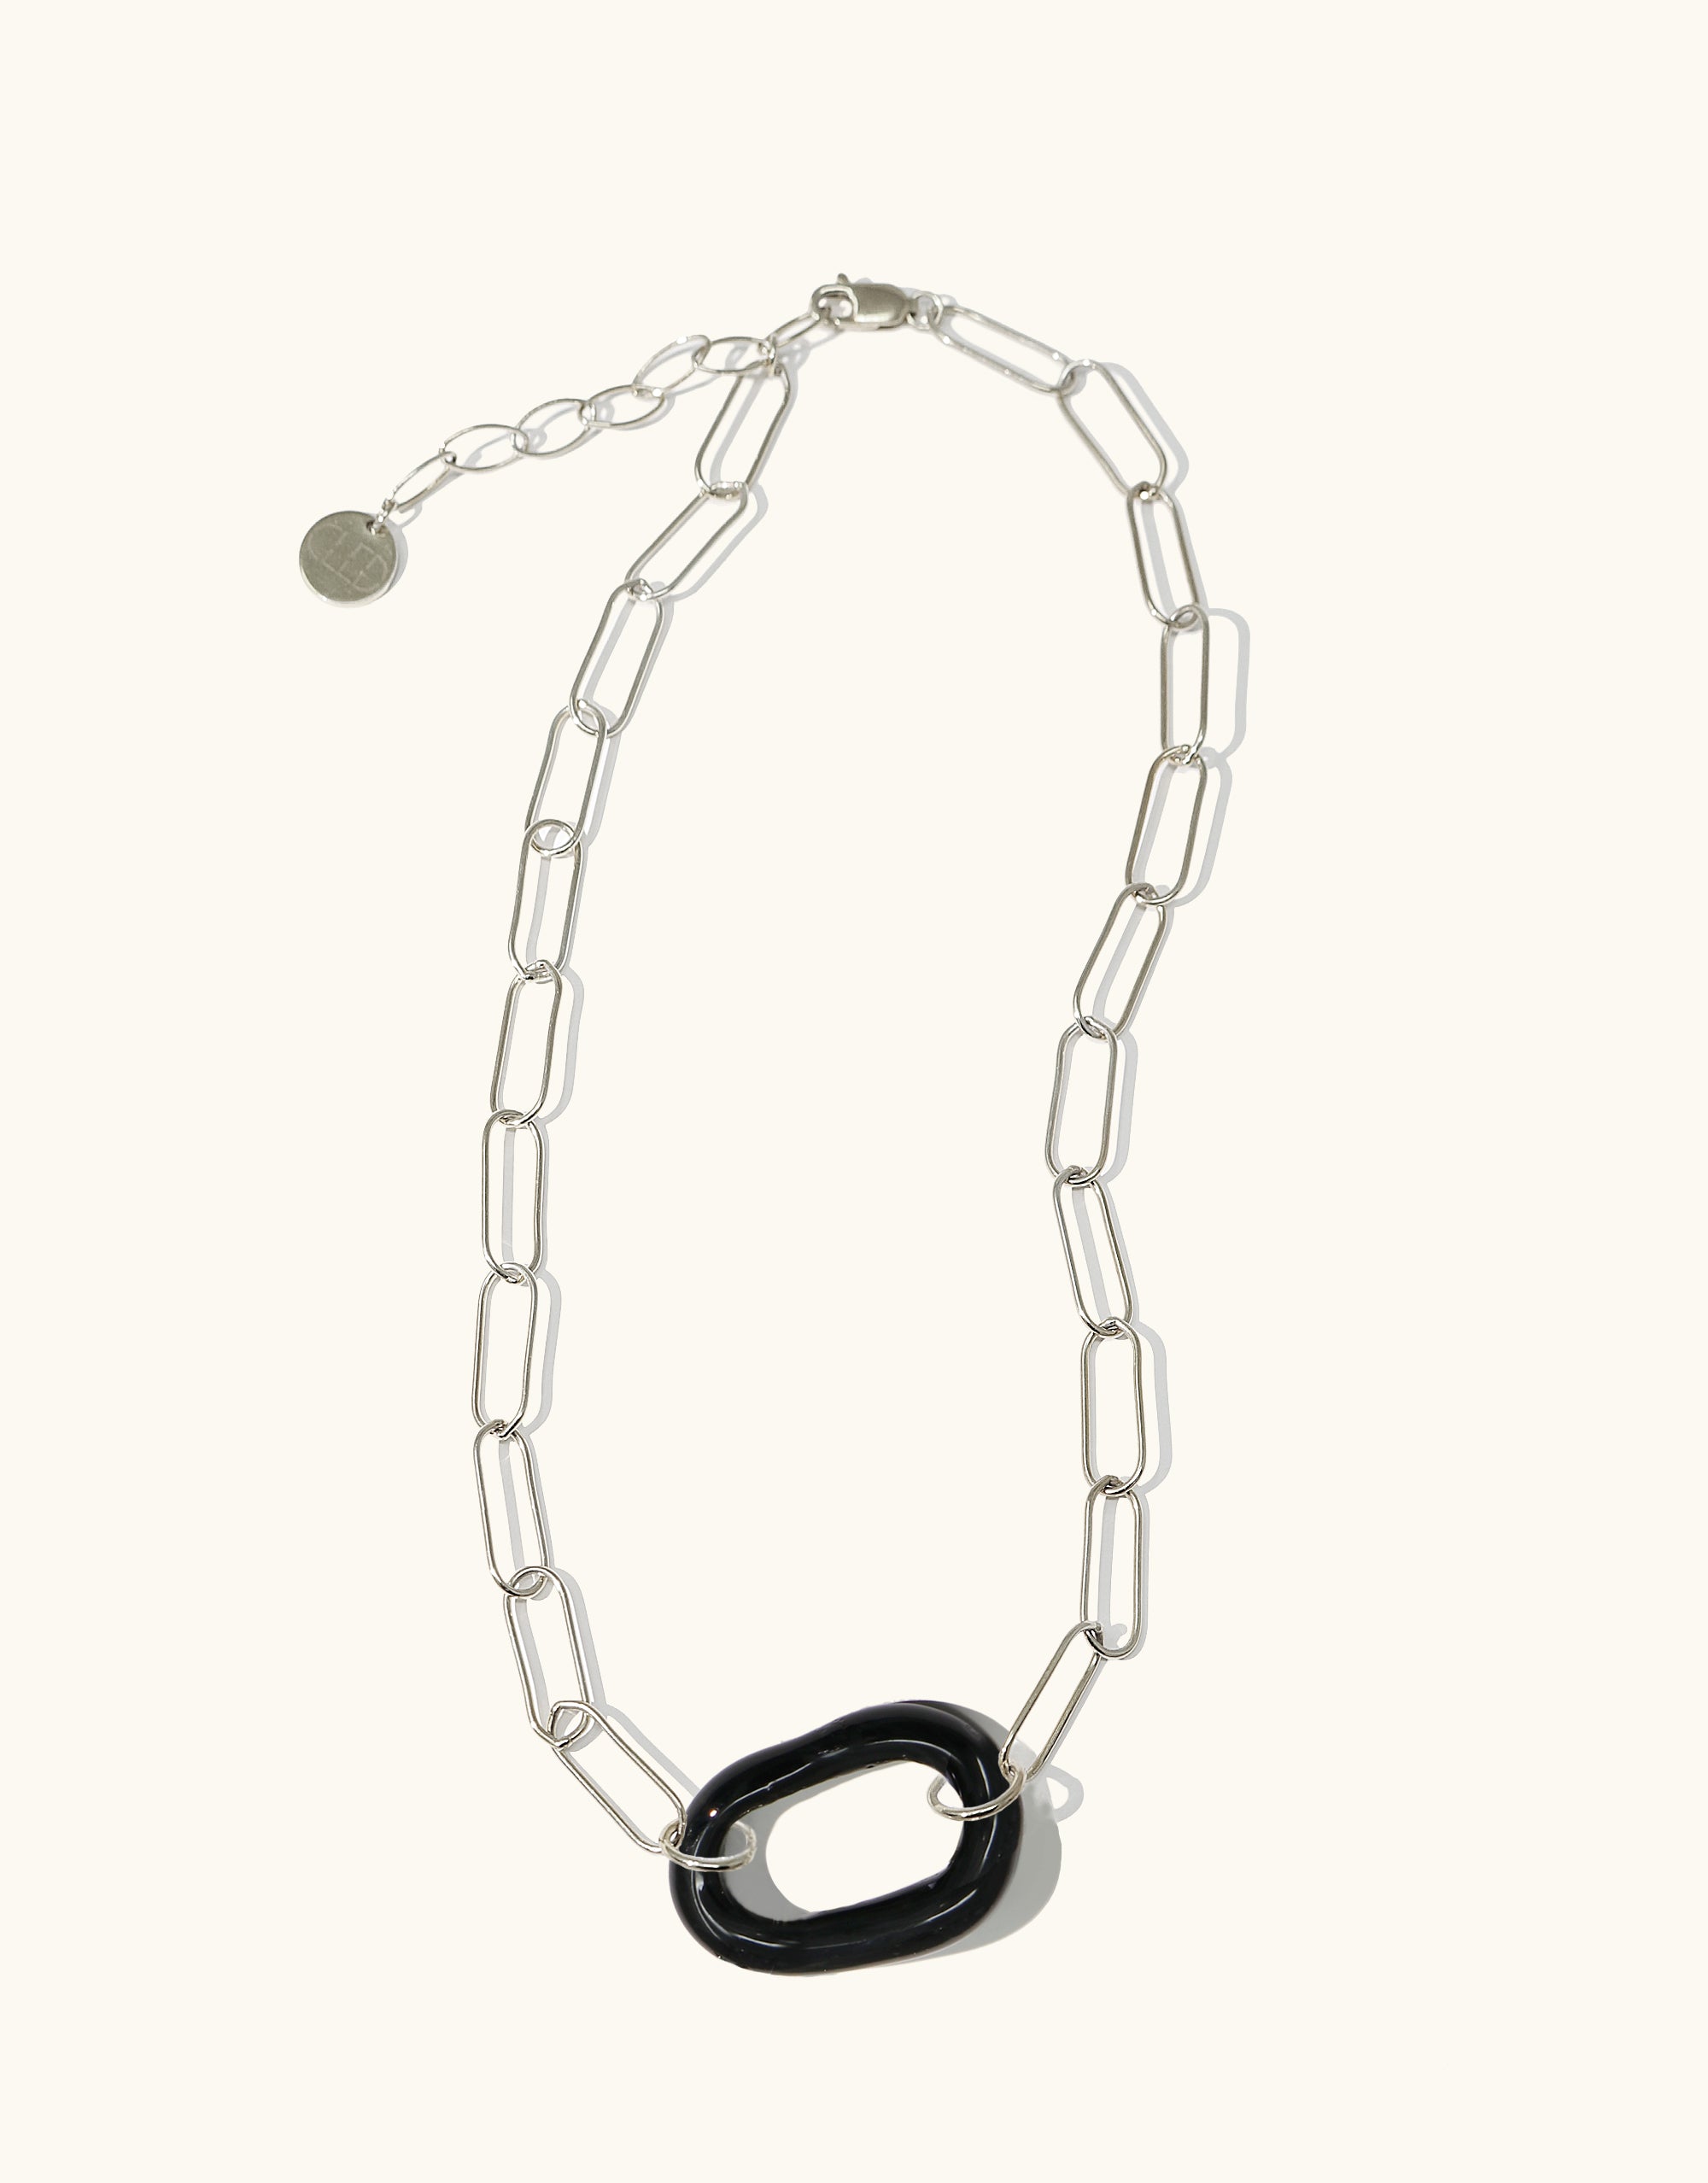 The Day Loop Necklace